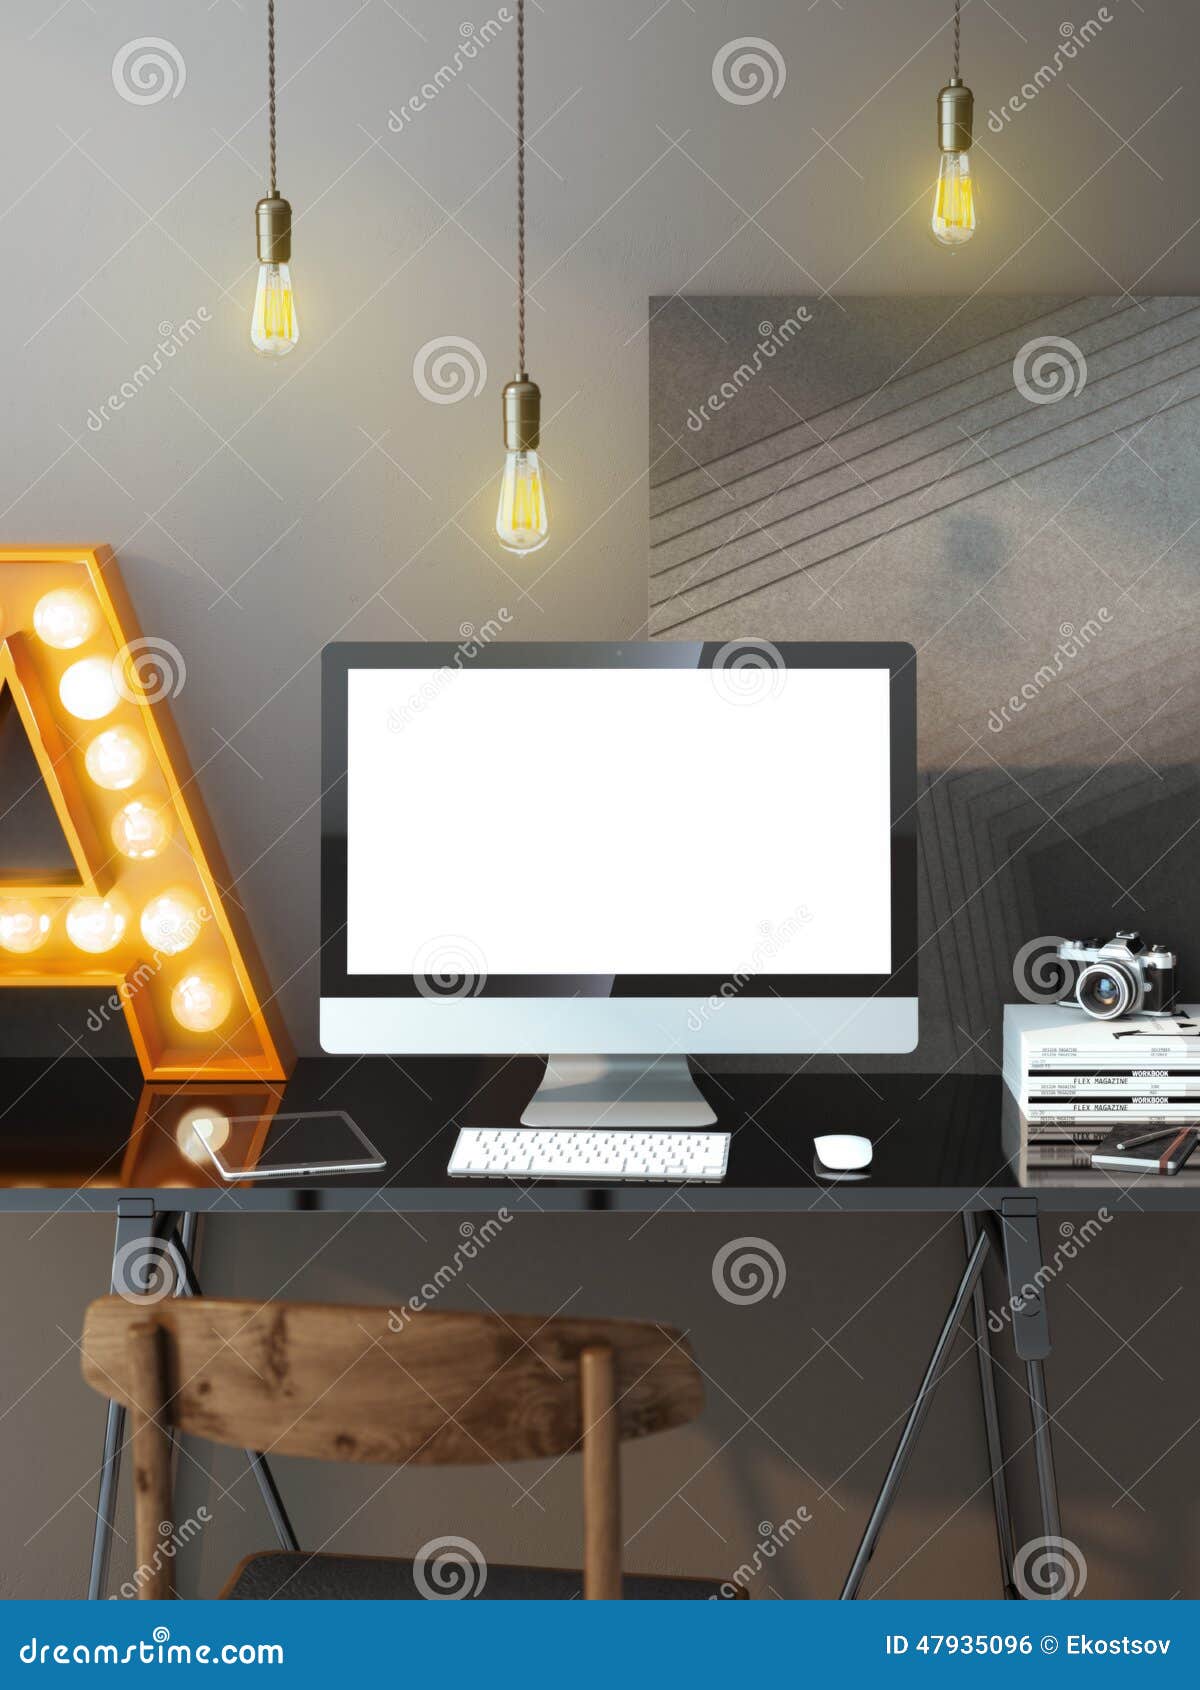 modern workspace with computer and bulbs